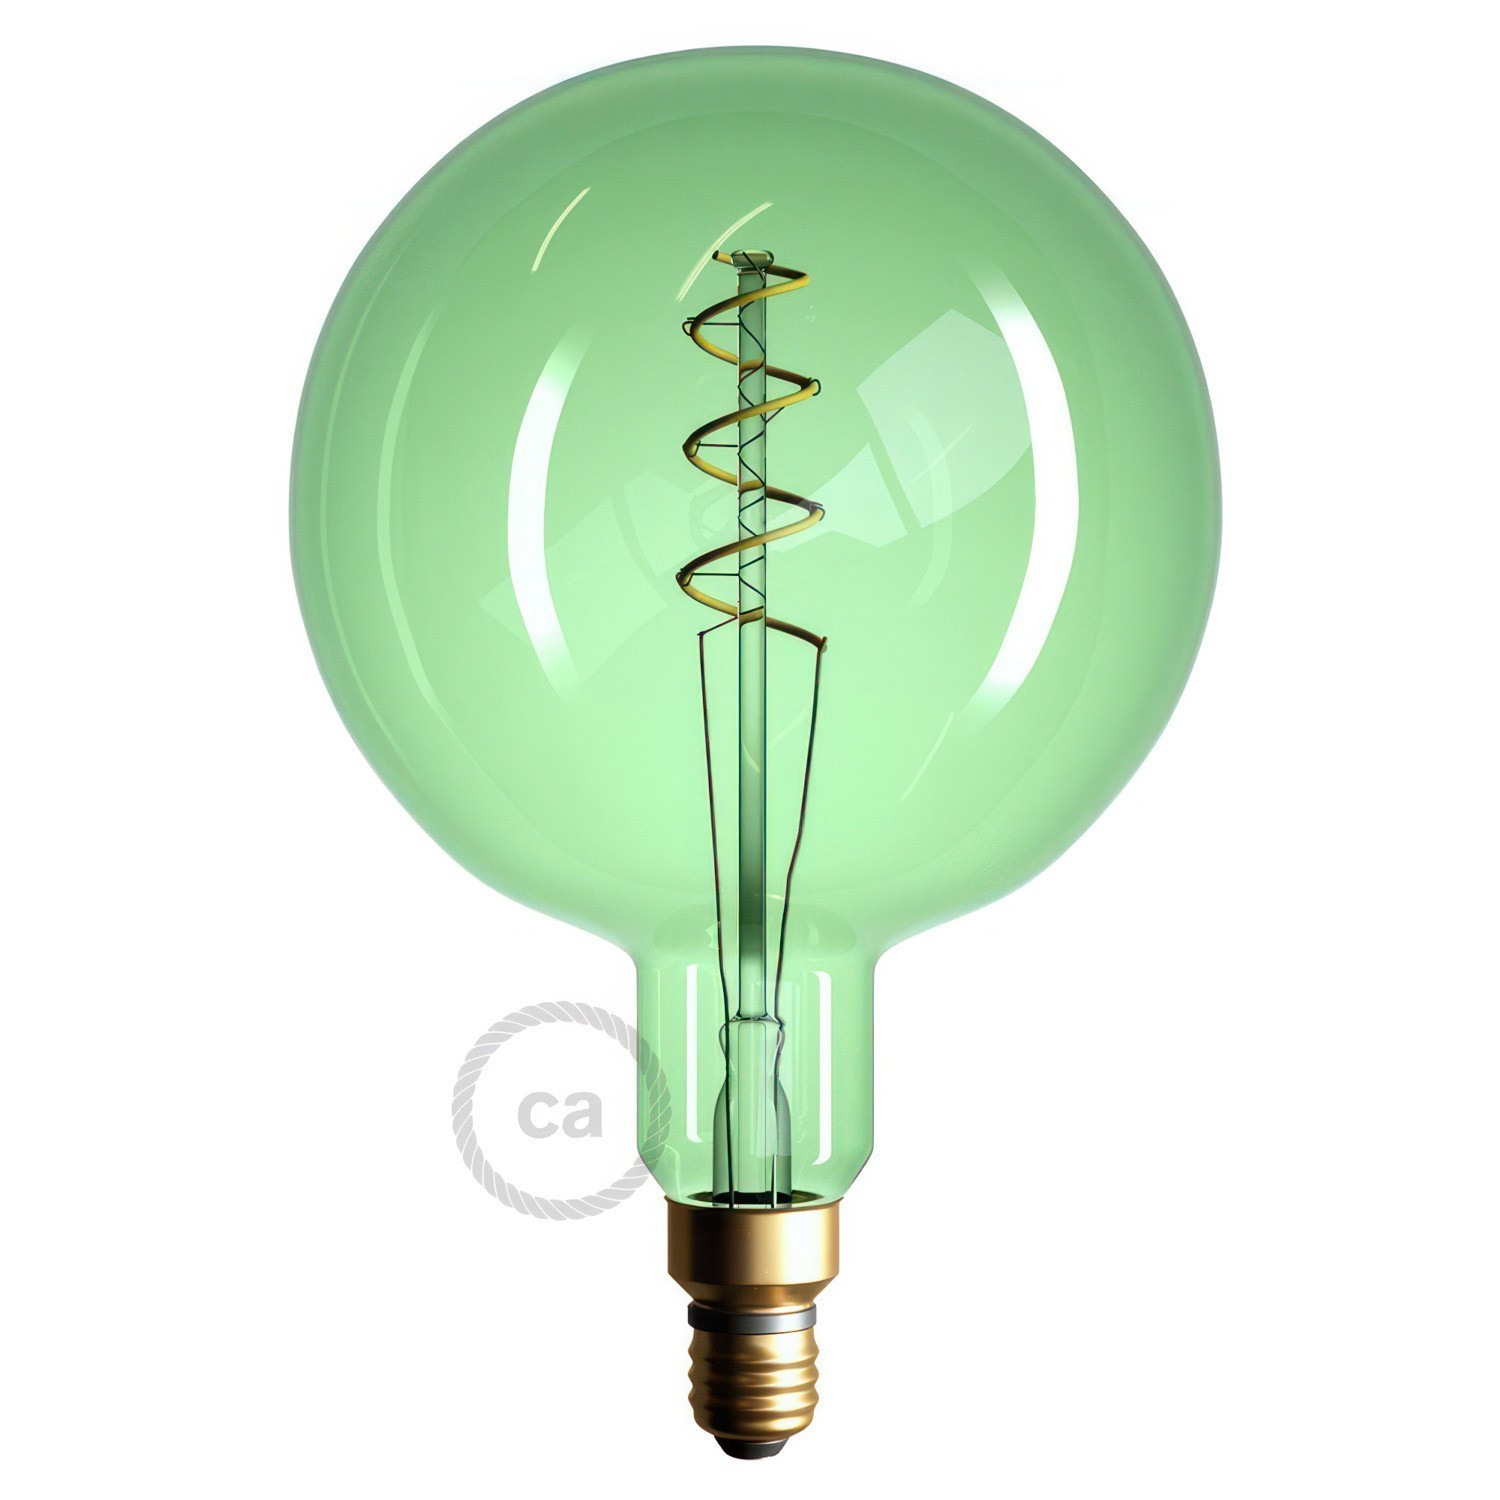 XXL LED Emerald Light Bulb - Sphere G200 Curved Spiral Filament - 5W 280Lm E27 2200K Dimmable